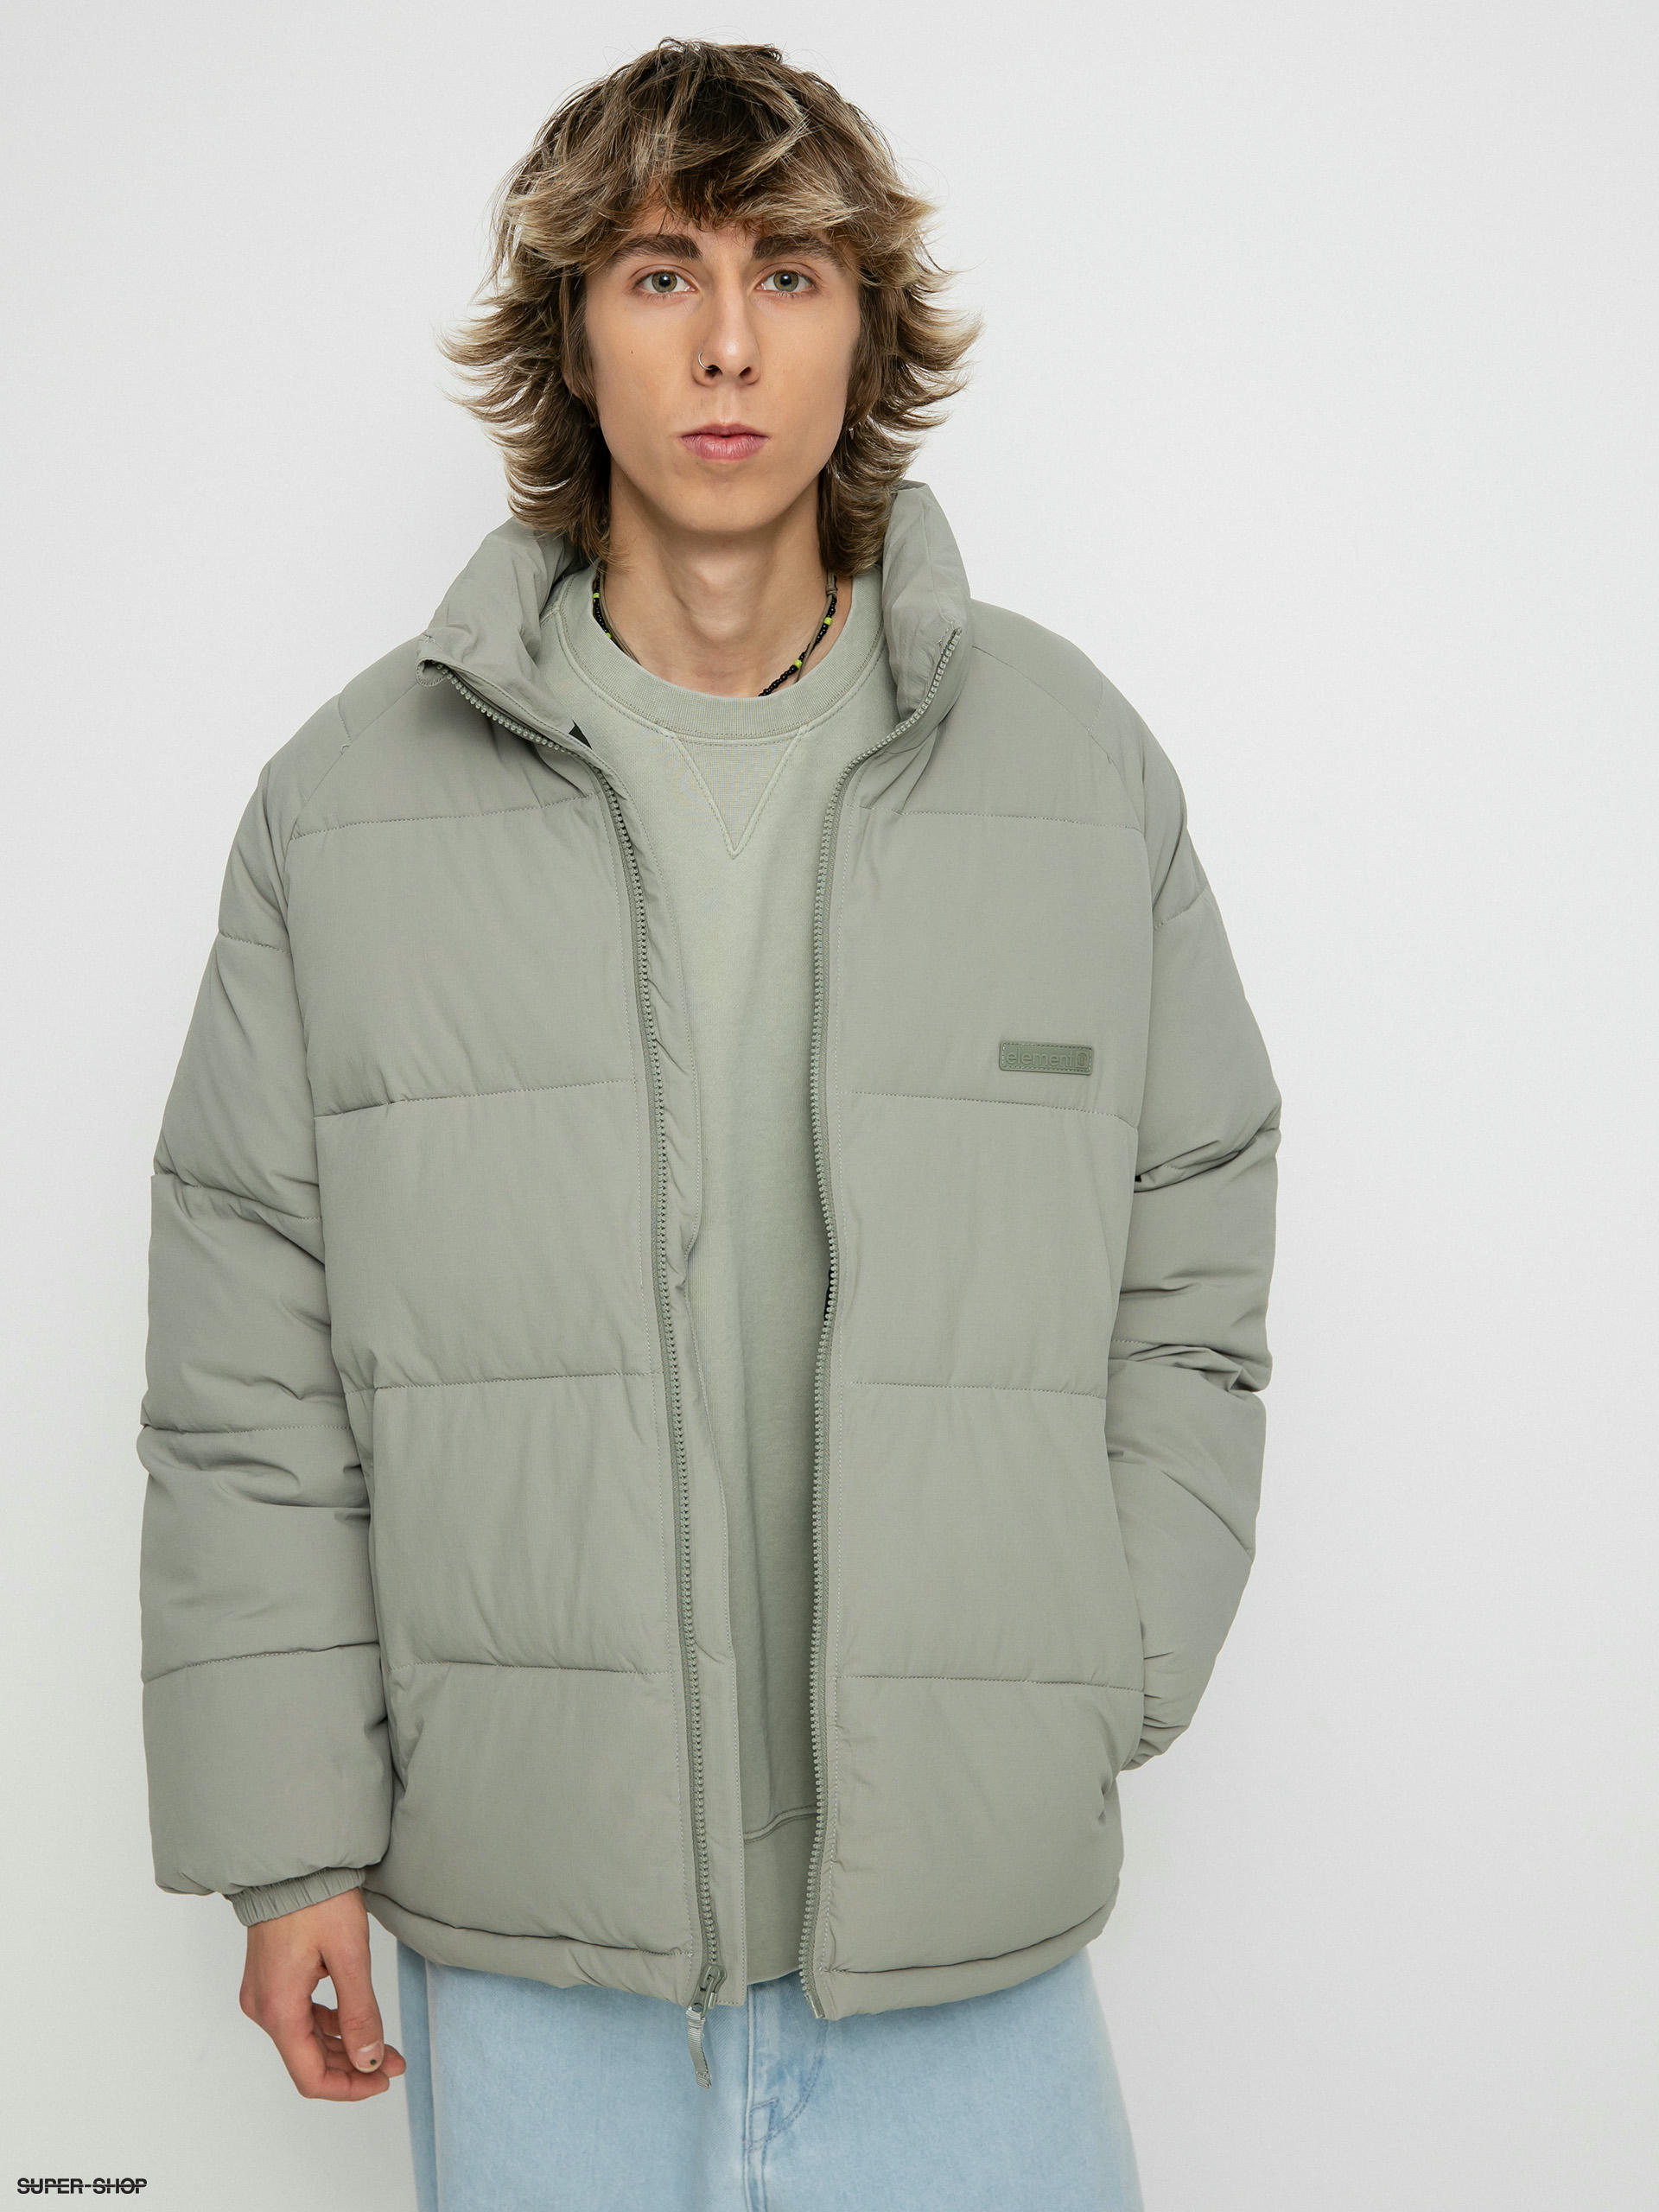 Fear of God Essentials Puffer Jacket Silver Reflective